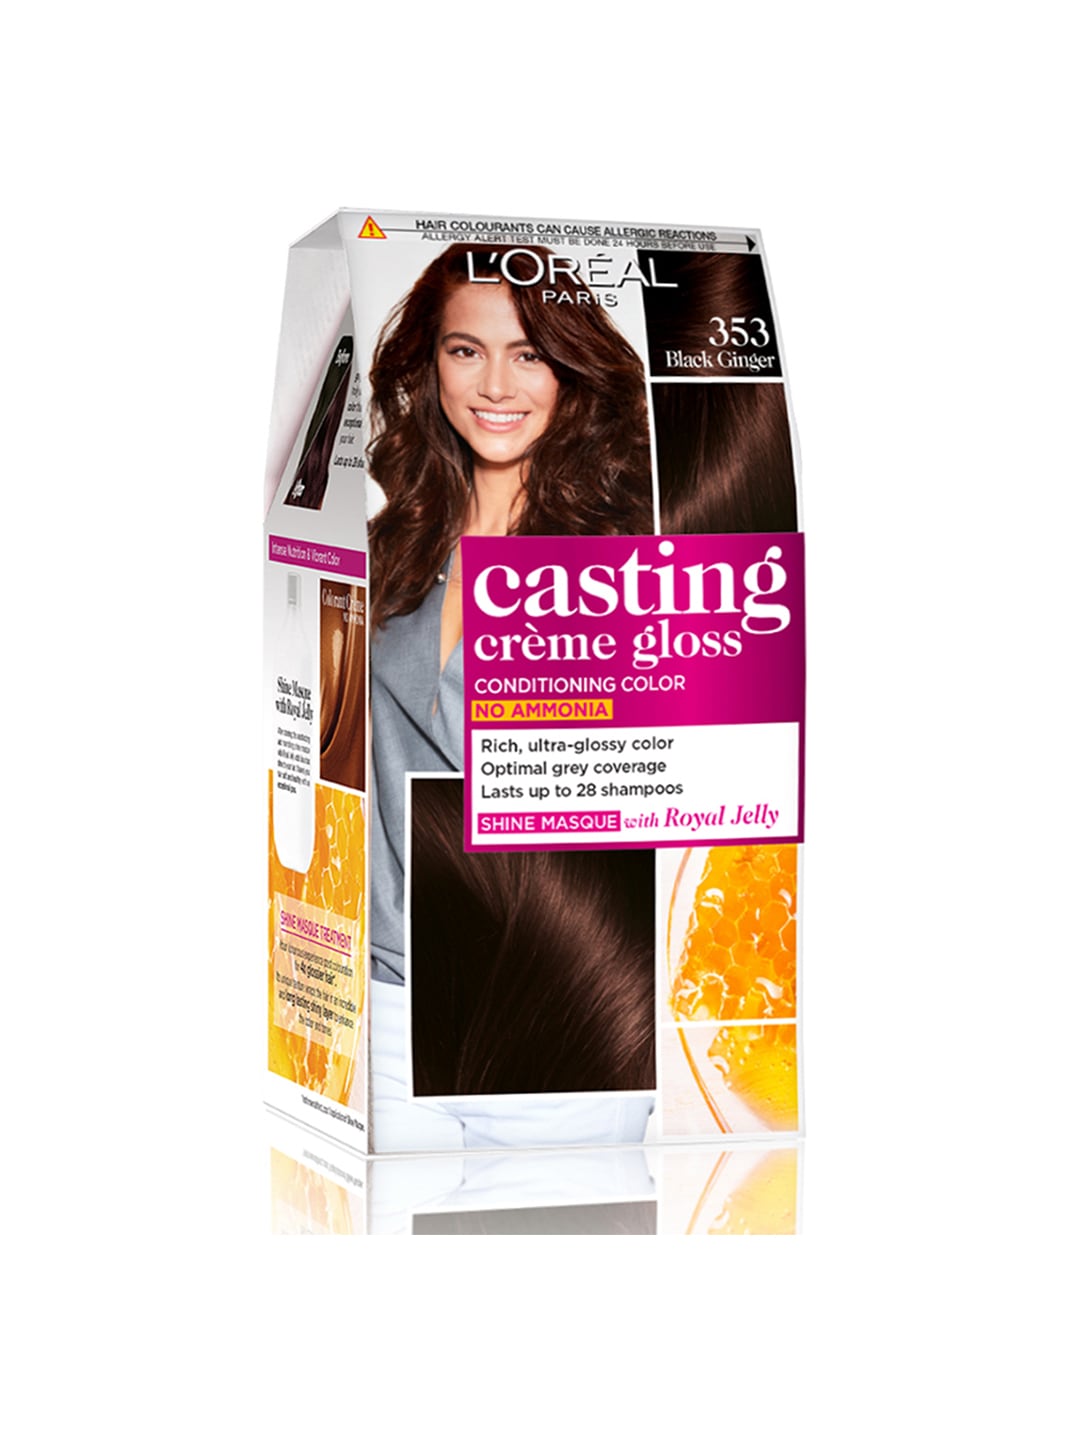 LOreal Paris Casting Creme Gloss Hair Color - Chocolate 535 87.5g+72ml Price in India